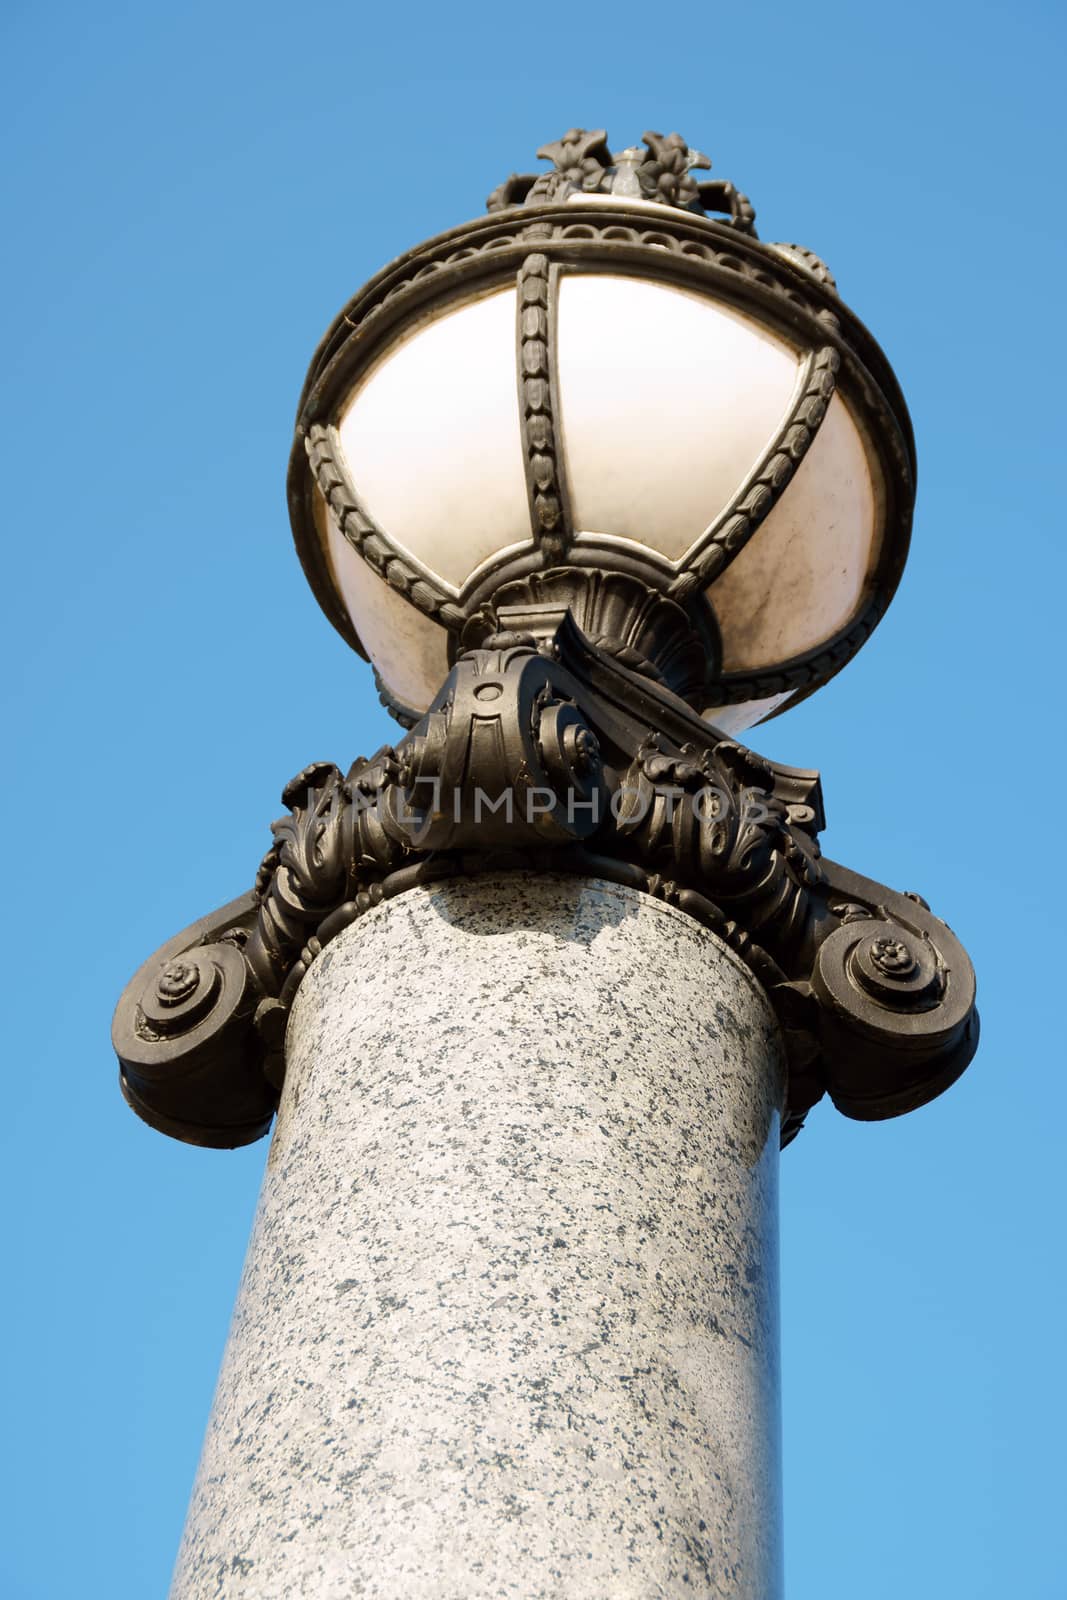 Art Nouveau street lamp against the blue sky from Museum Island in Berlin